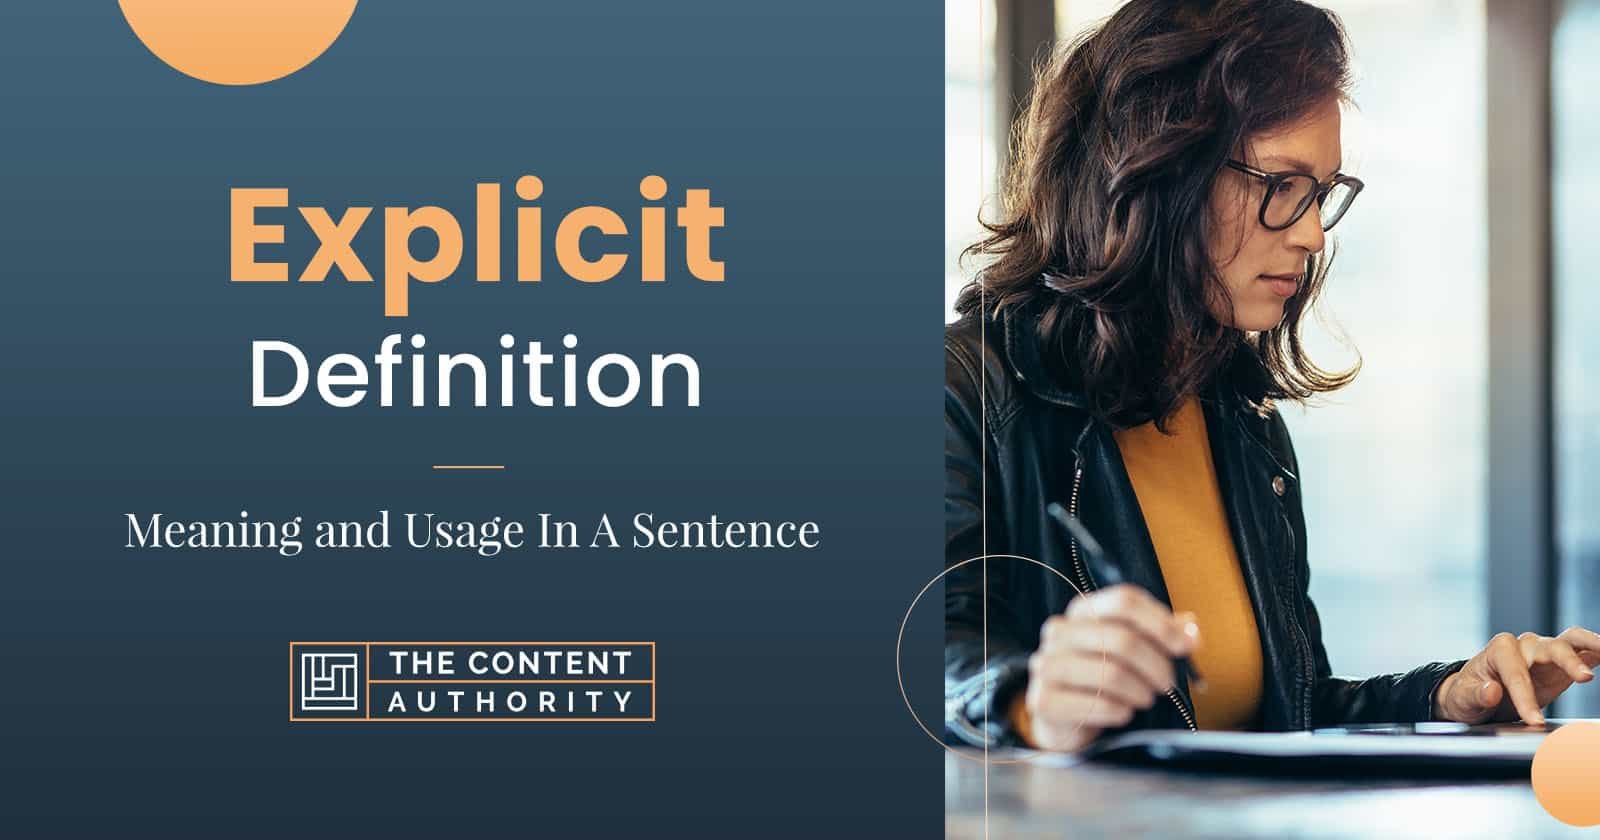 Explicit Definition – Meaning and Usage In A Sentence